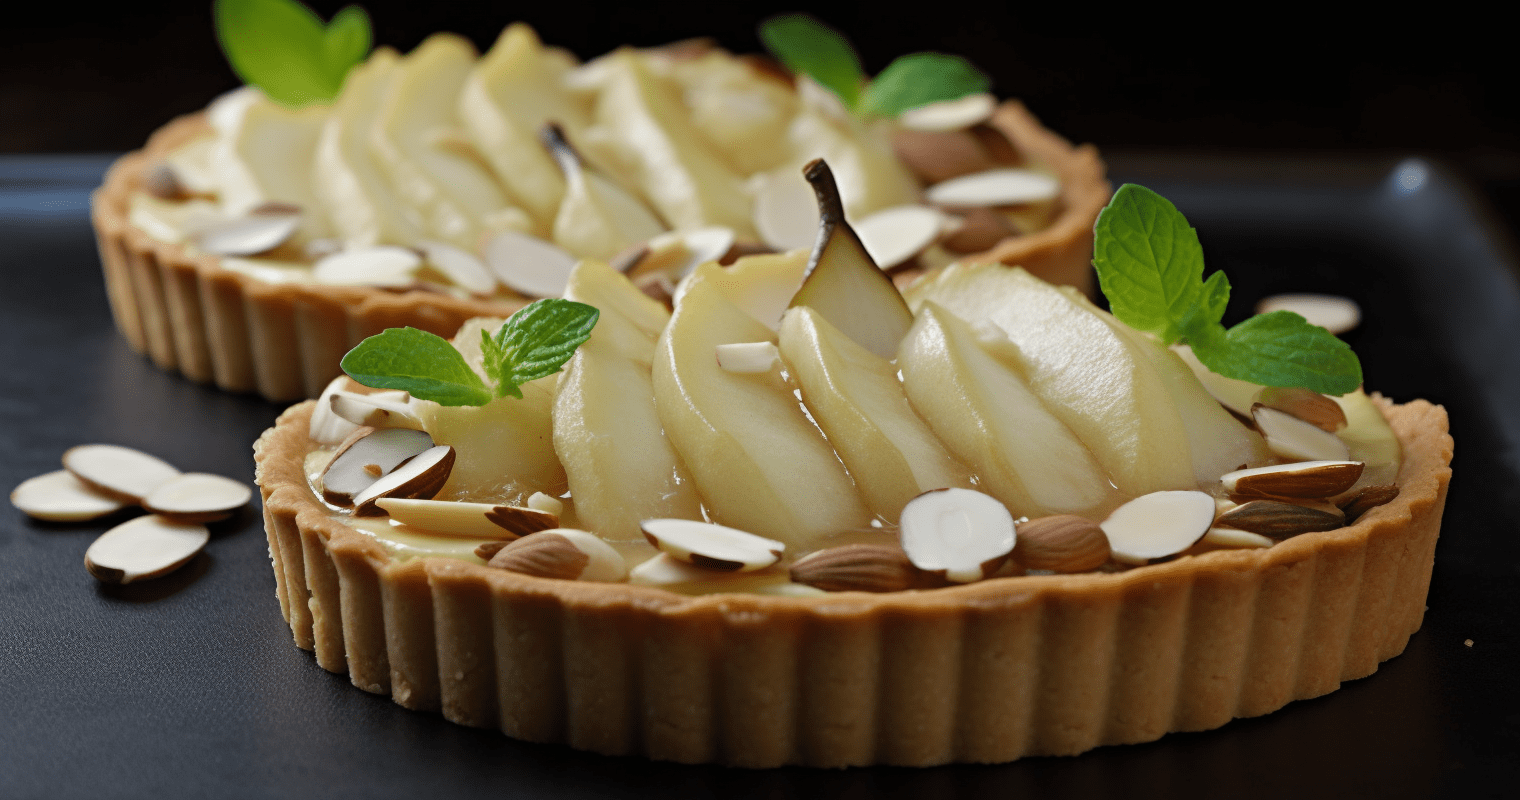 Pear and Almond Tart: A Deliciously Sweet and Nutty Dessert